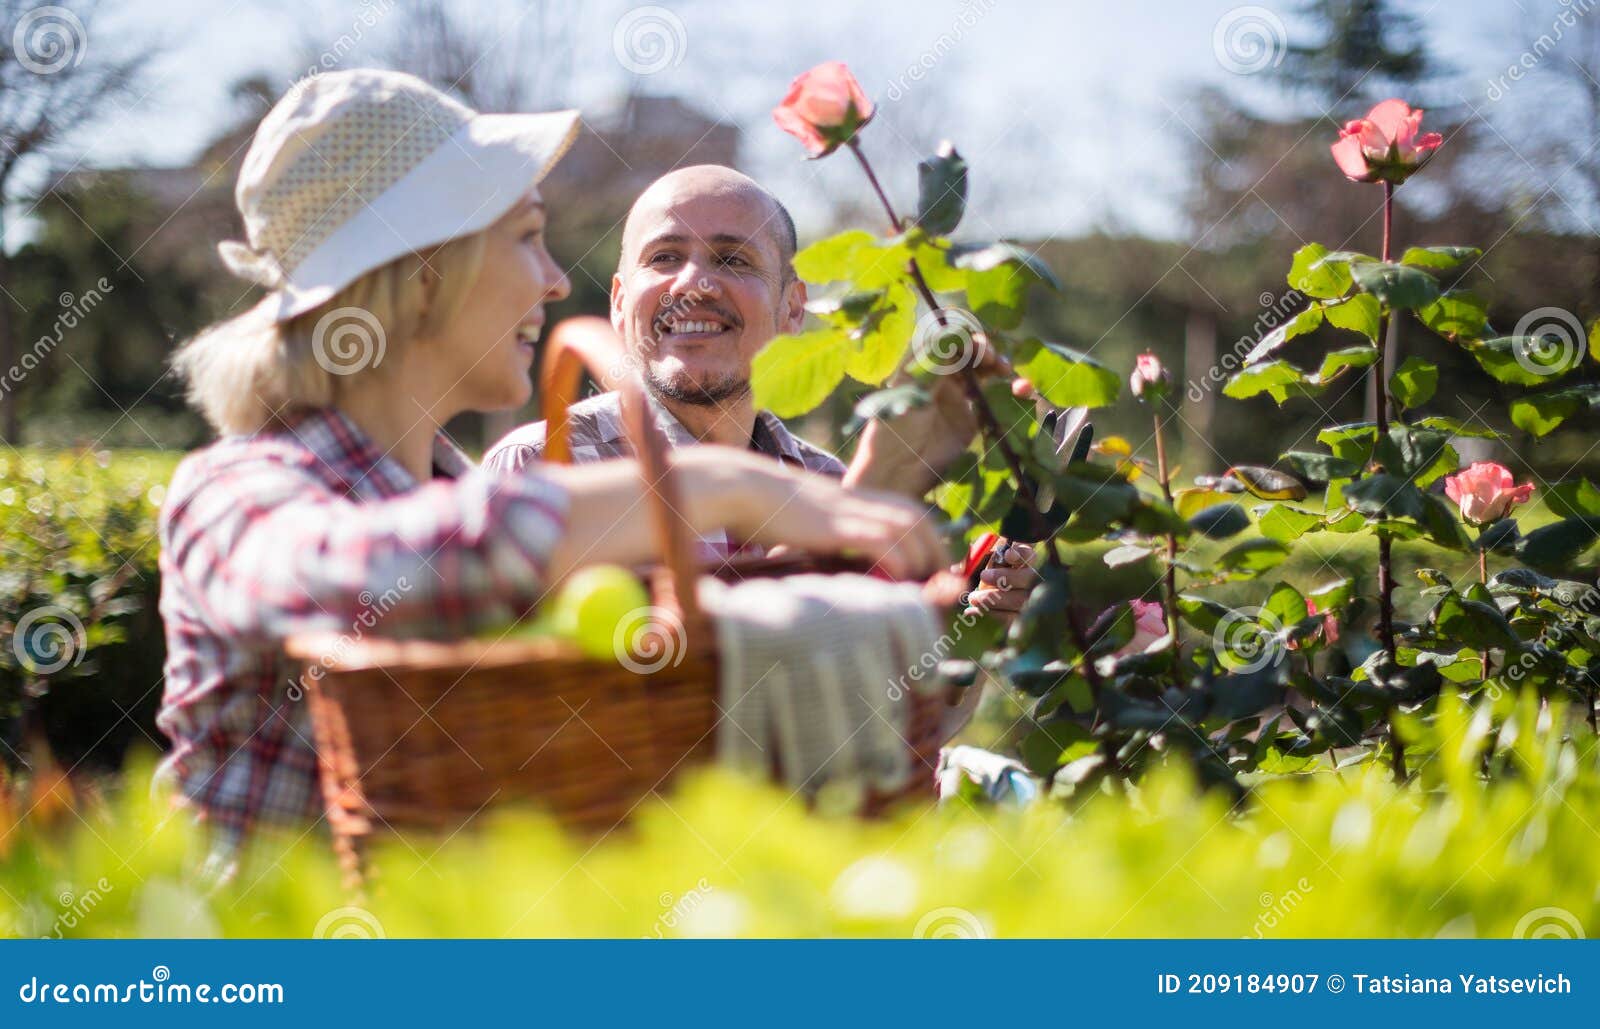 Woman and Man Look after Roses in the Garden Stock Image - Image of ...